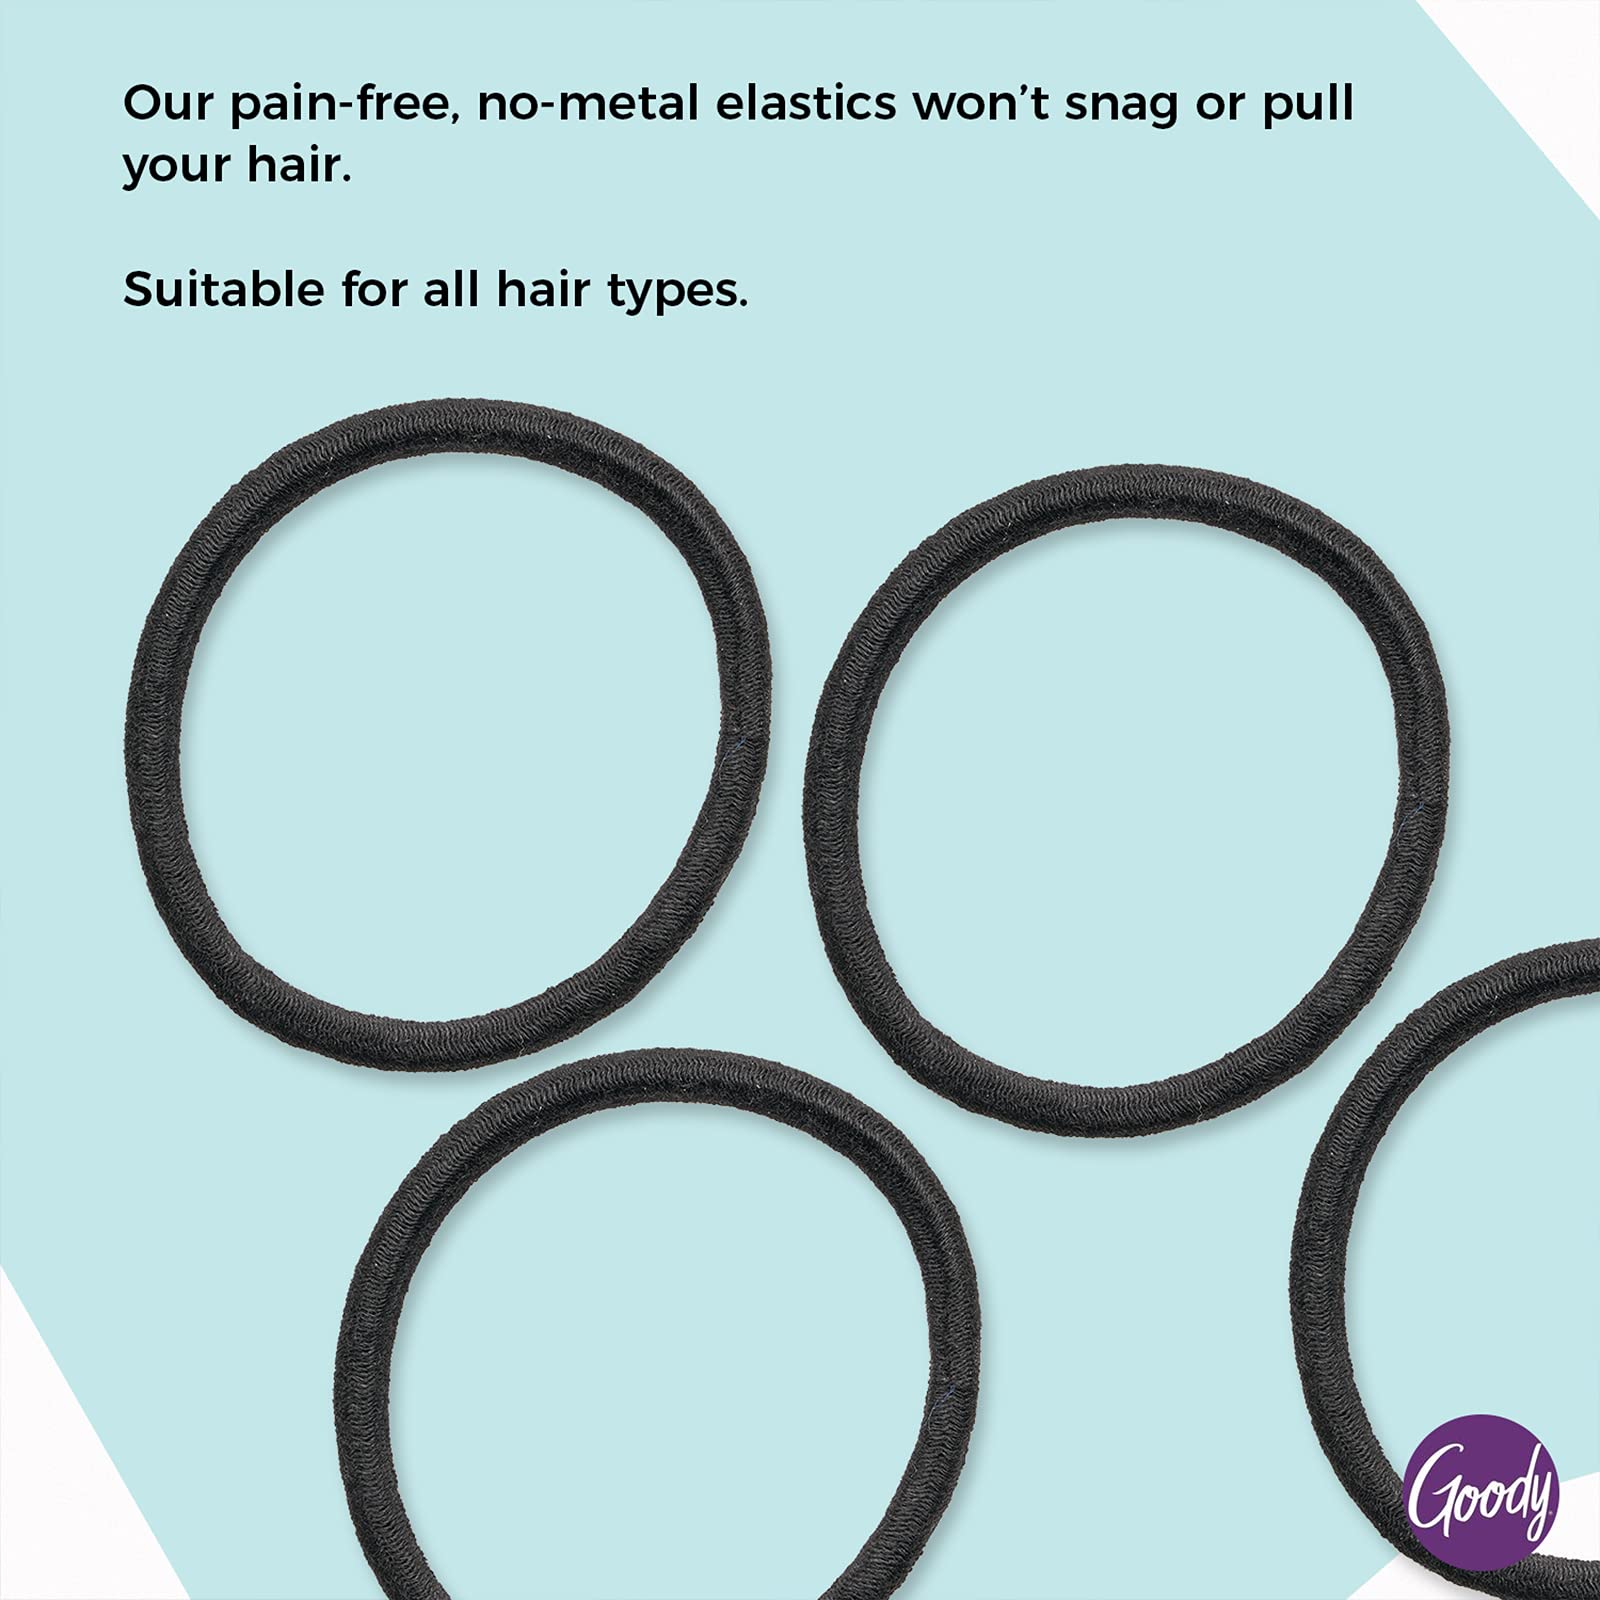 Goody Ouchless Womens Elastic Hair Tie - 30 Count, Black - 4MM for Medium Hair- Hair Accessories for Women Perfect for Long Lasting Braids, Ponytails and More - Pain-Free